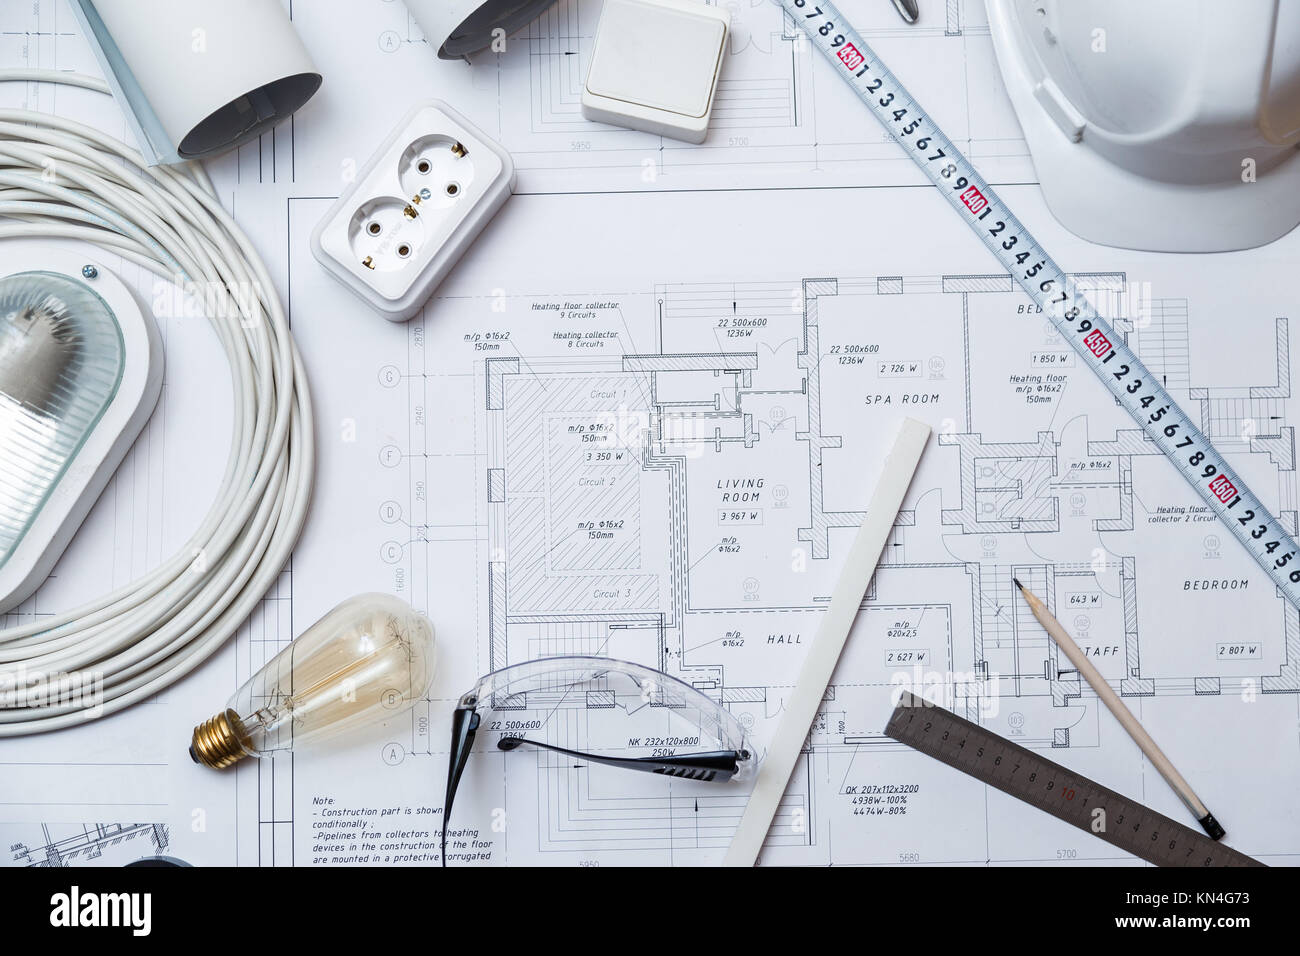 Electrical Master Equipment On House Plans. Stock Photo